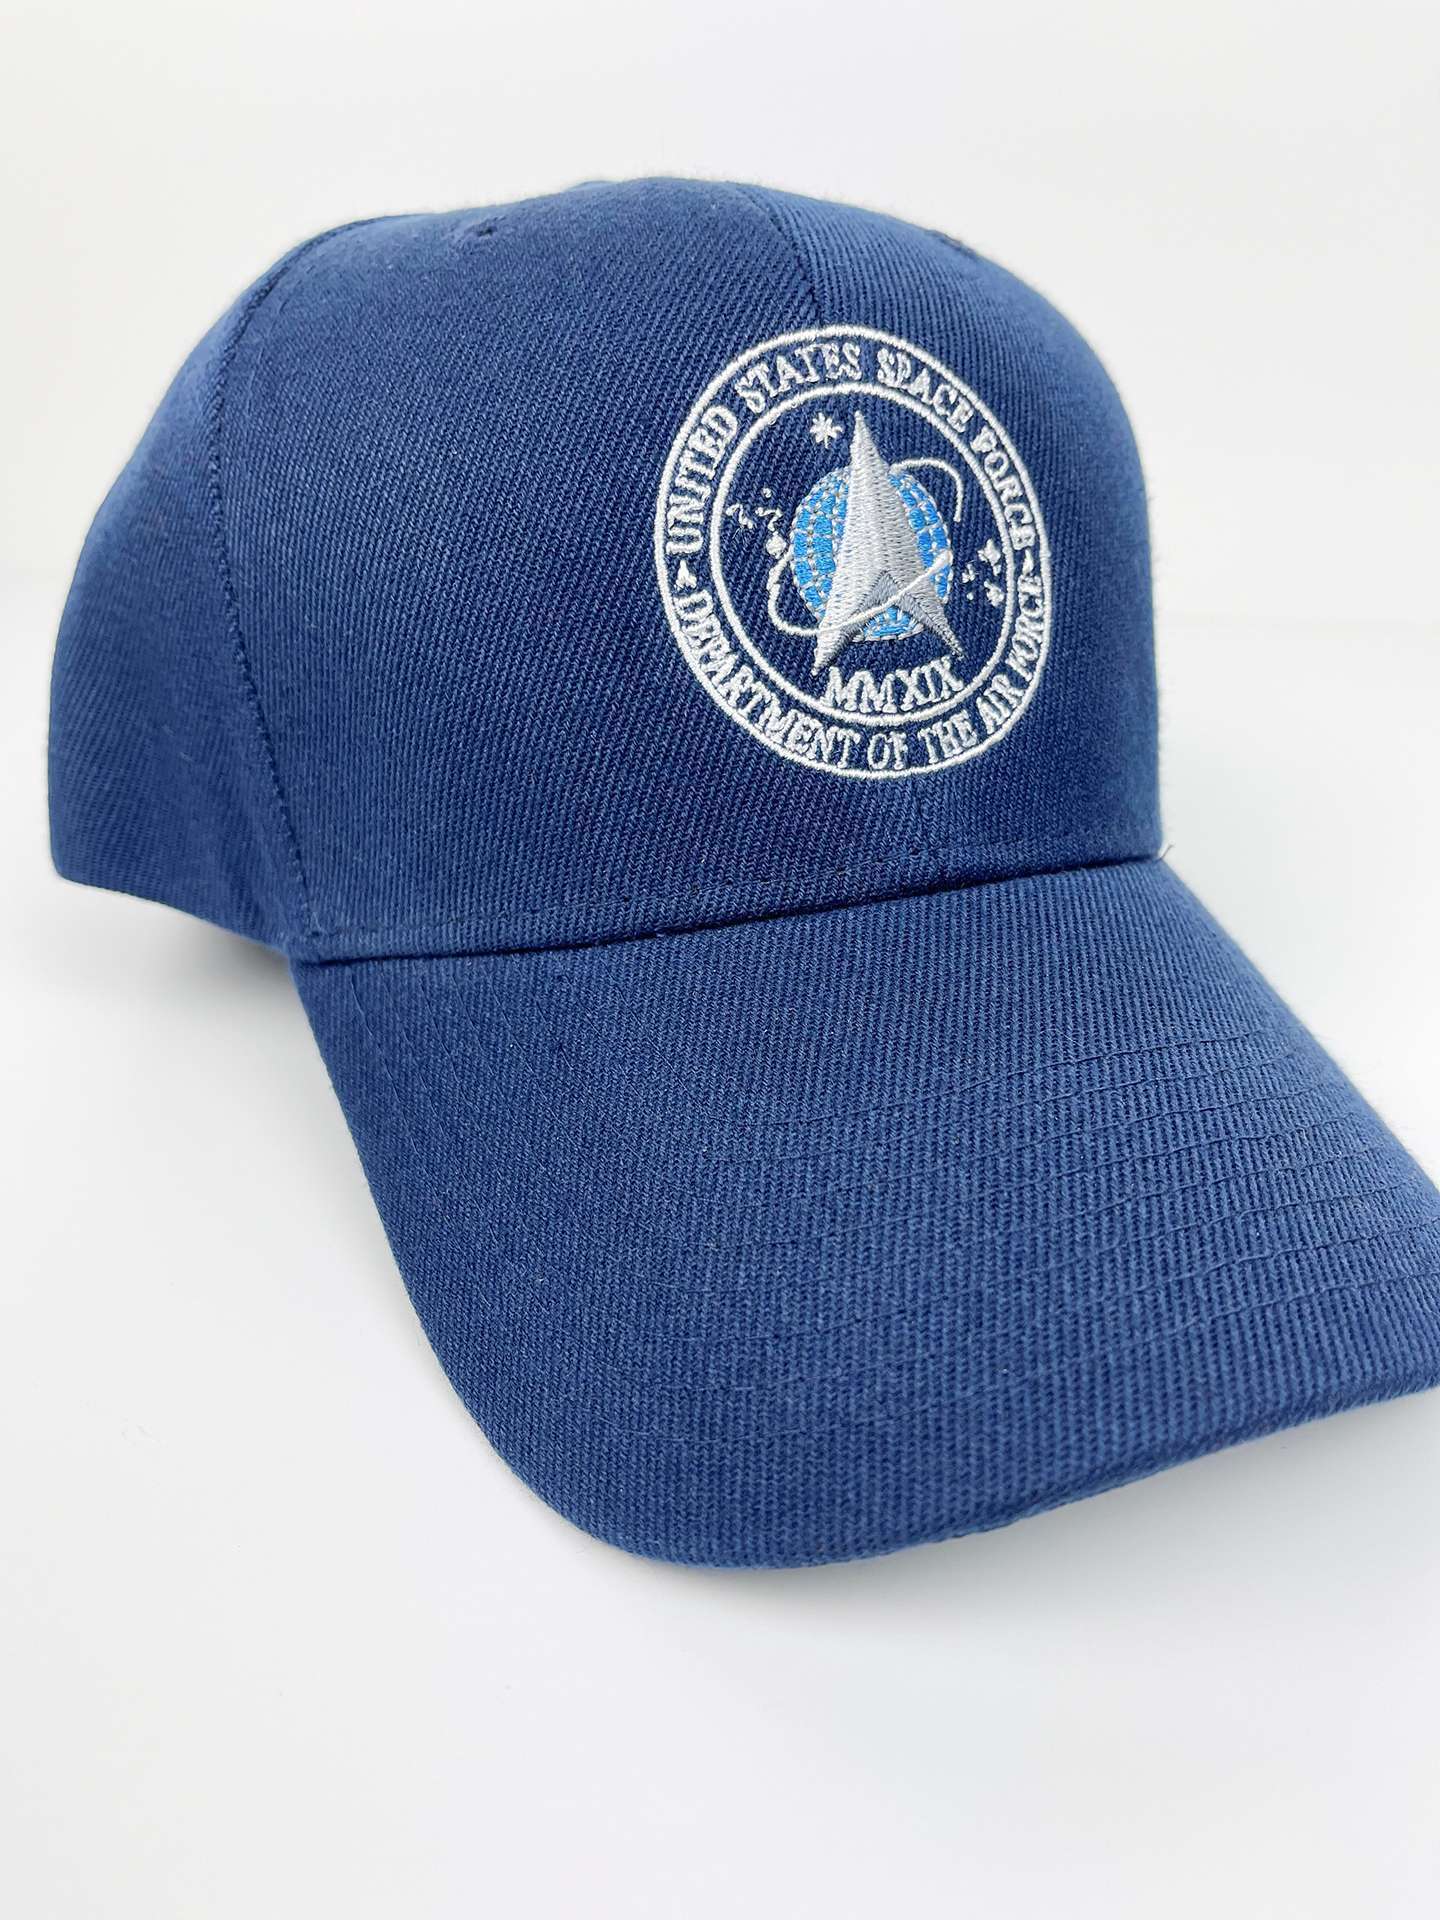 US Space Force Hat - Sik-Nastee Apparel Co.